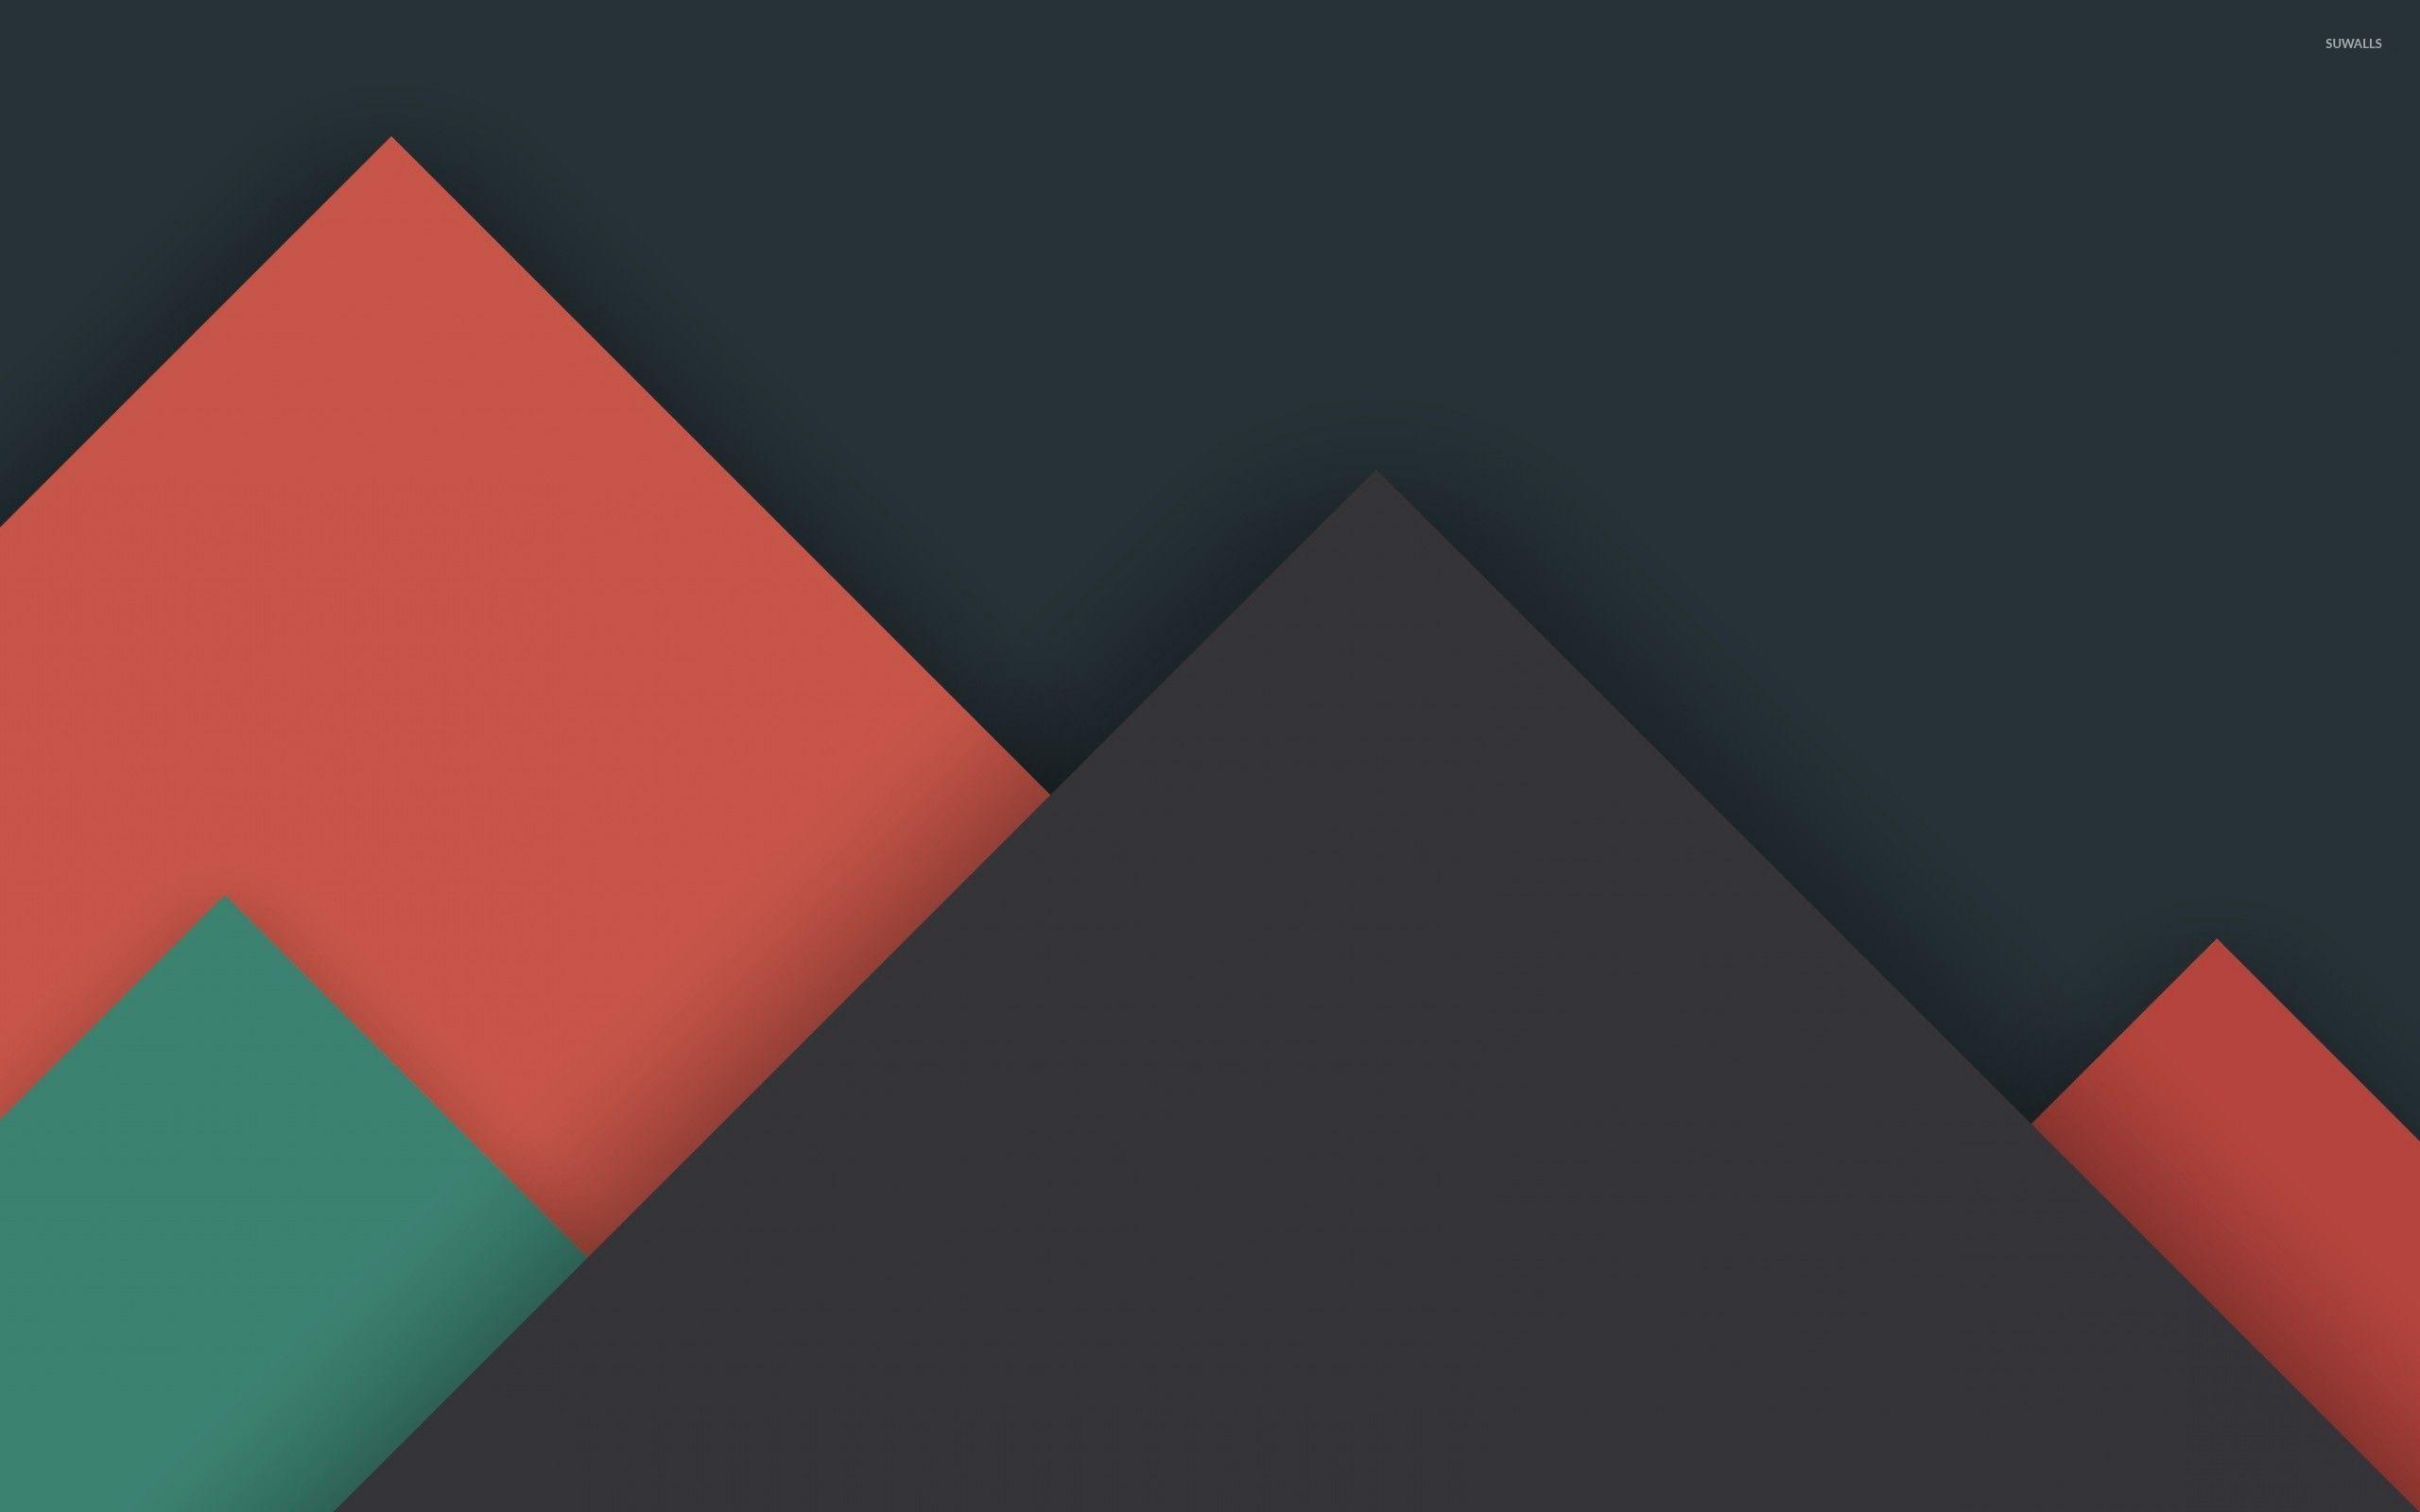 Wallpapers of the Week abstract shapes and colors